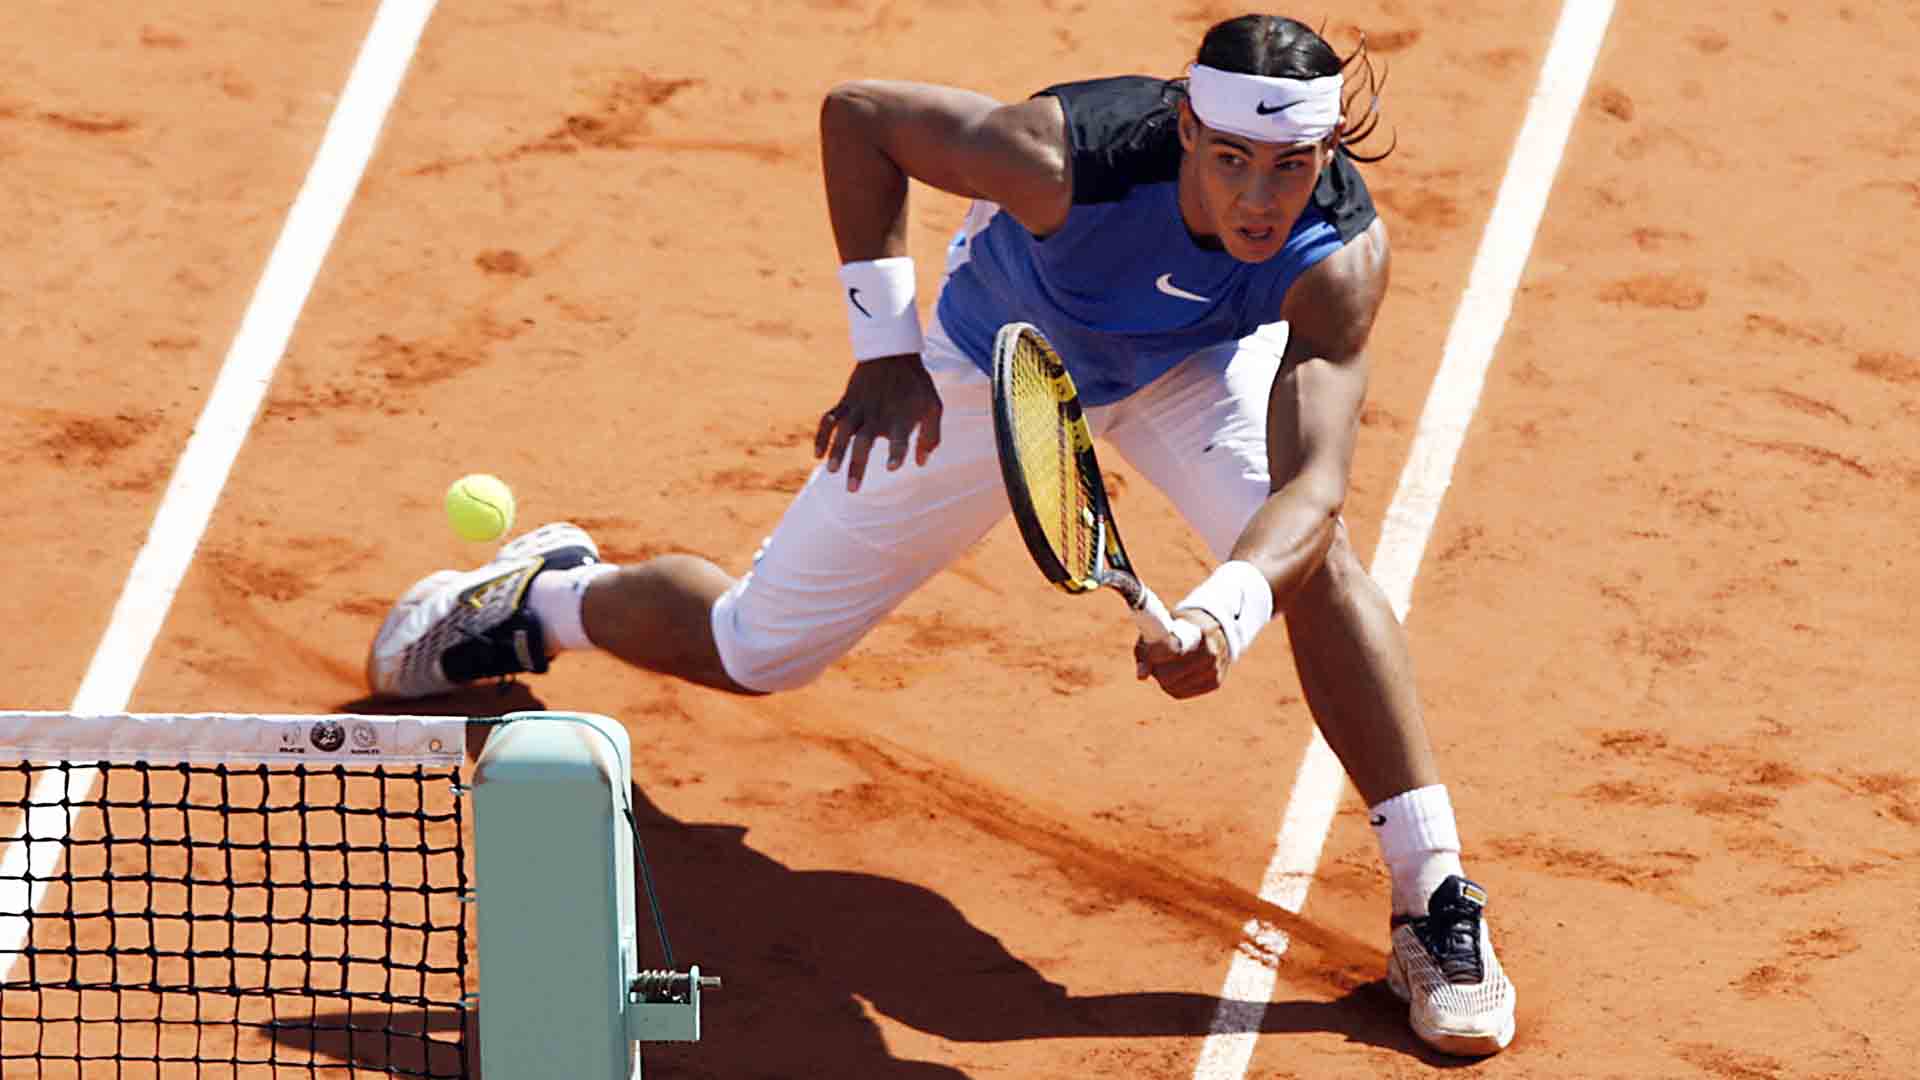 Rafael Nadal becomes the first player to defeat Roger Federer in a Grand Slam final with a 1-6, 6-1, 6-4, 7-6(4) victory at 2006 Roland Garros.